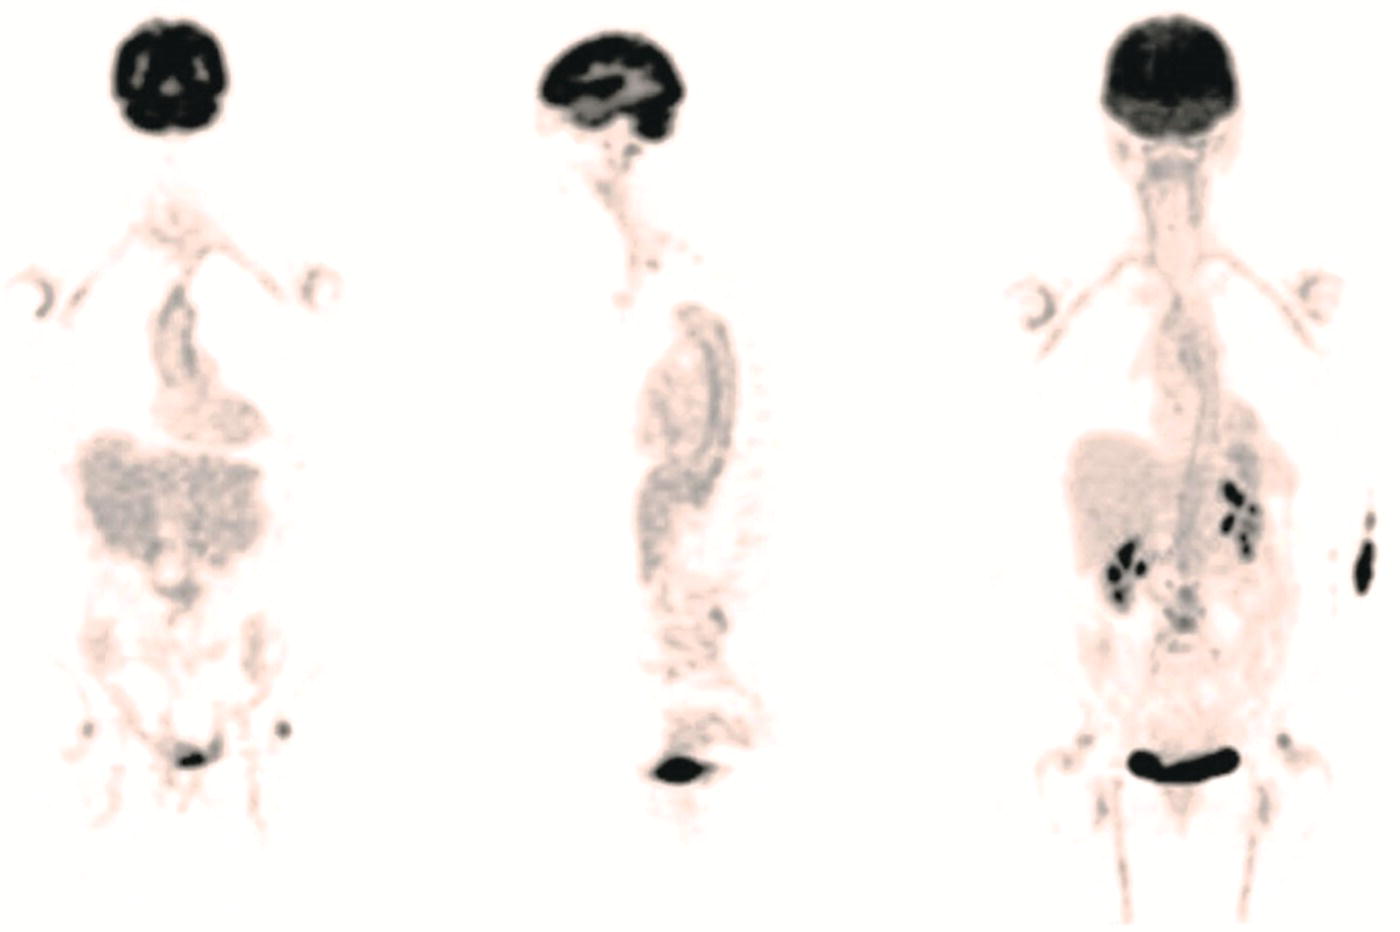 Schematic illustration of a 71-year-old woman was examined for nuchal pain, fatigue, and 10 kg weight loss in 5.5 months.